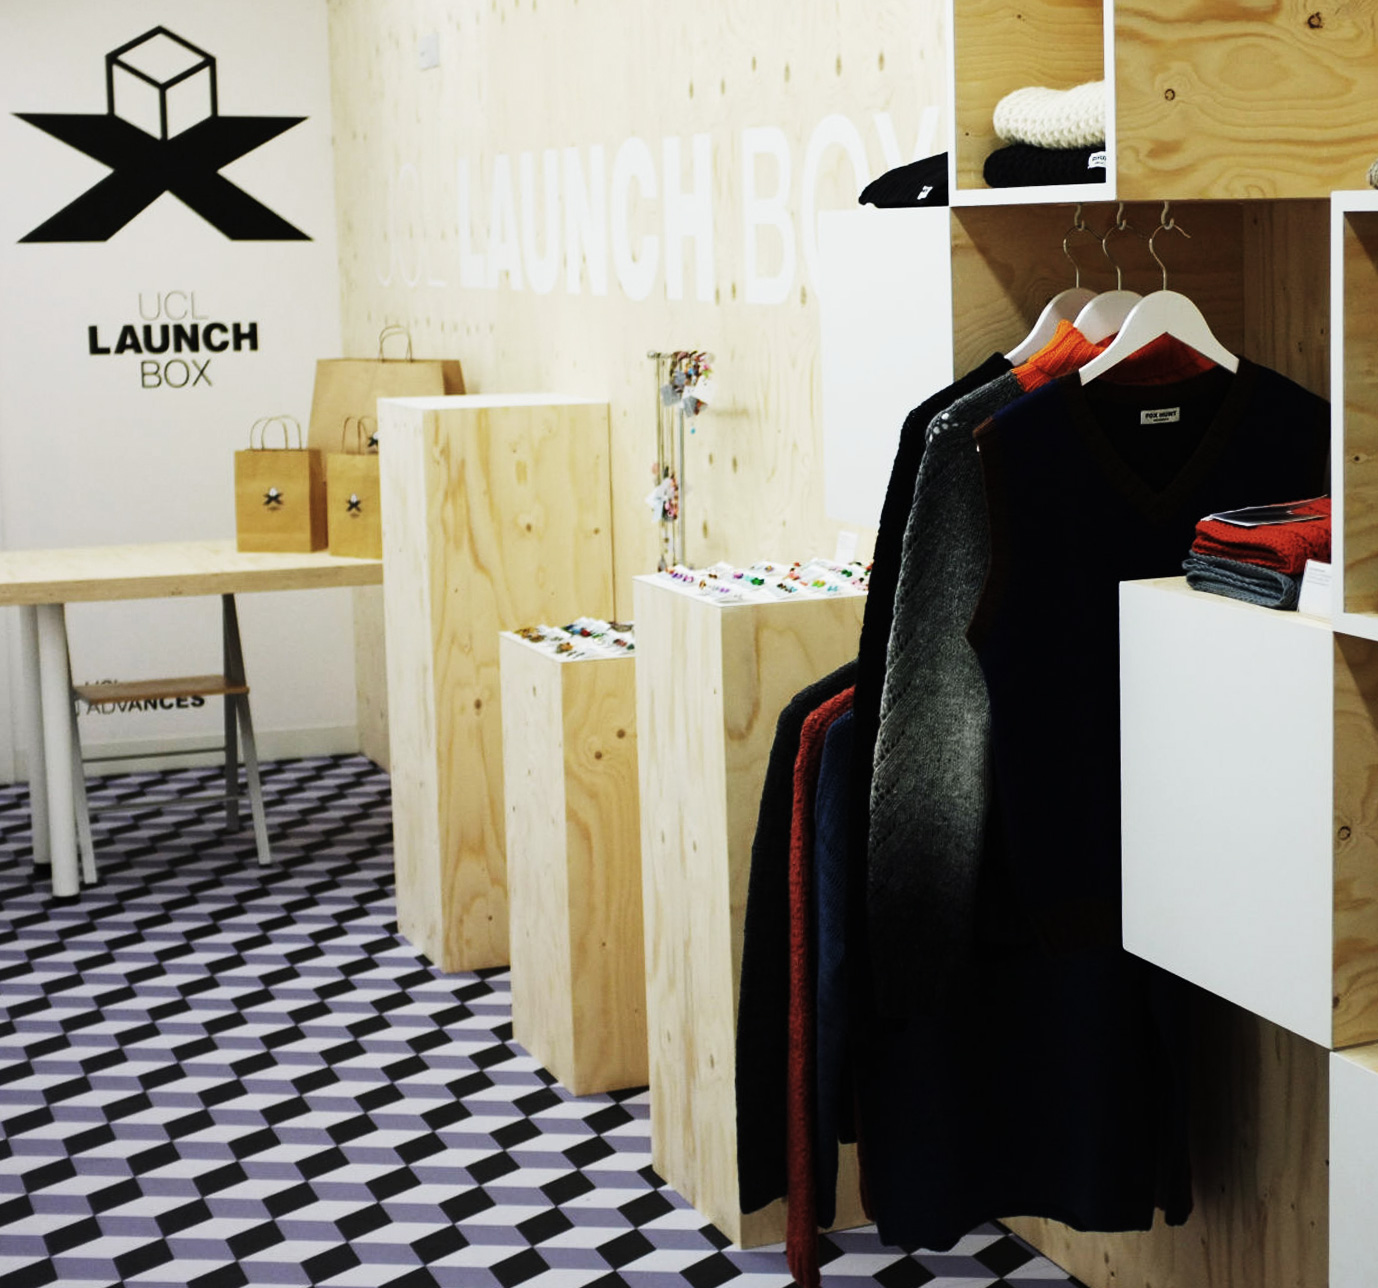 ucl launchbox brand identity for website and popup shop.jpg